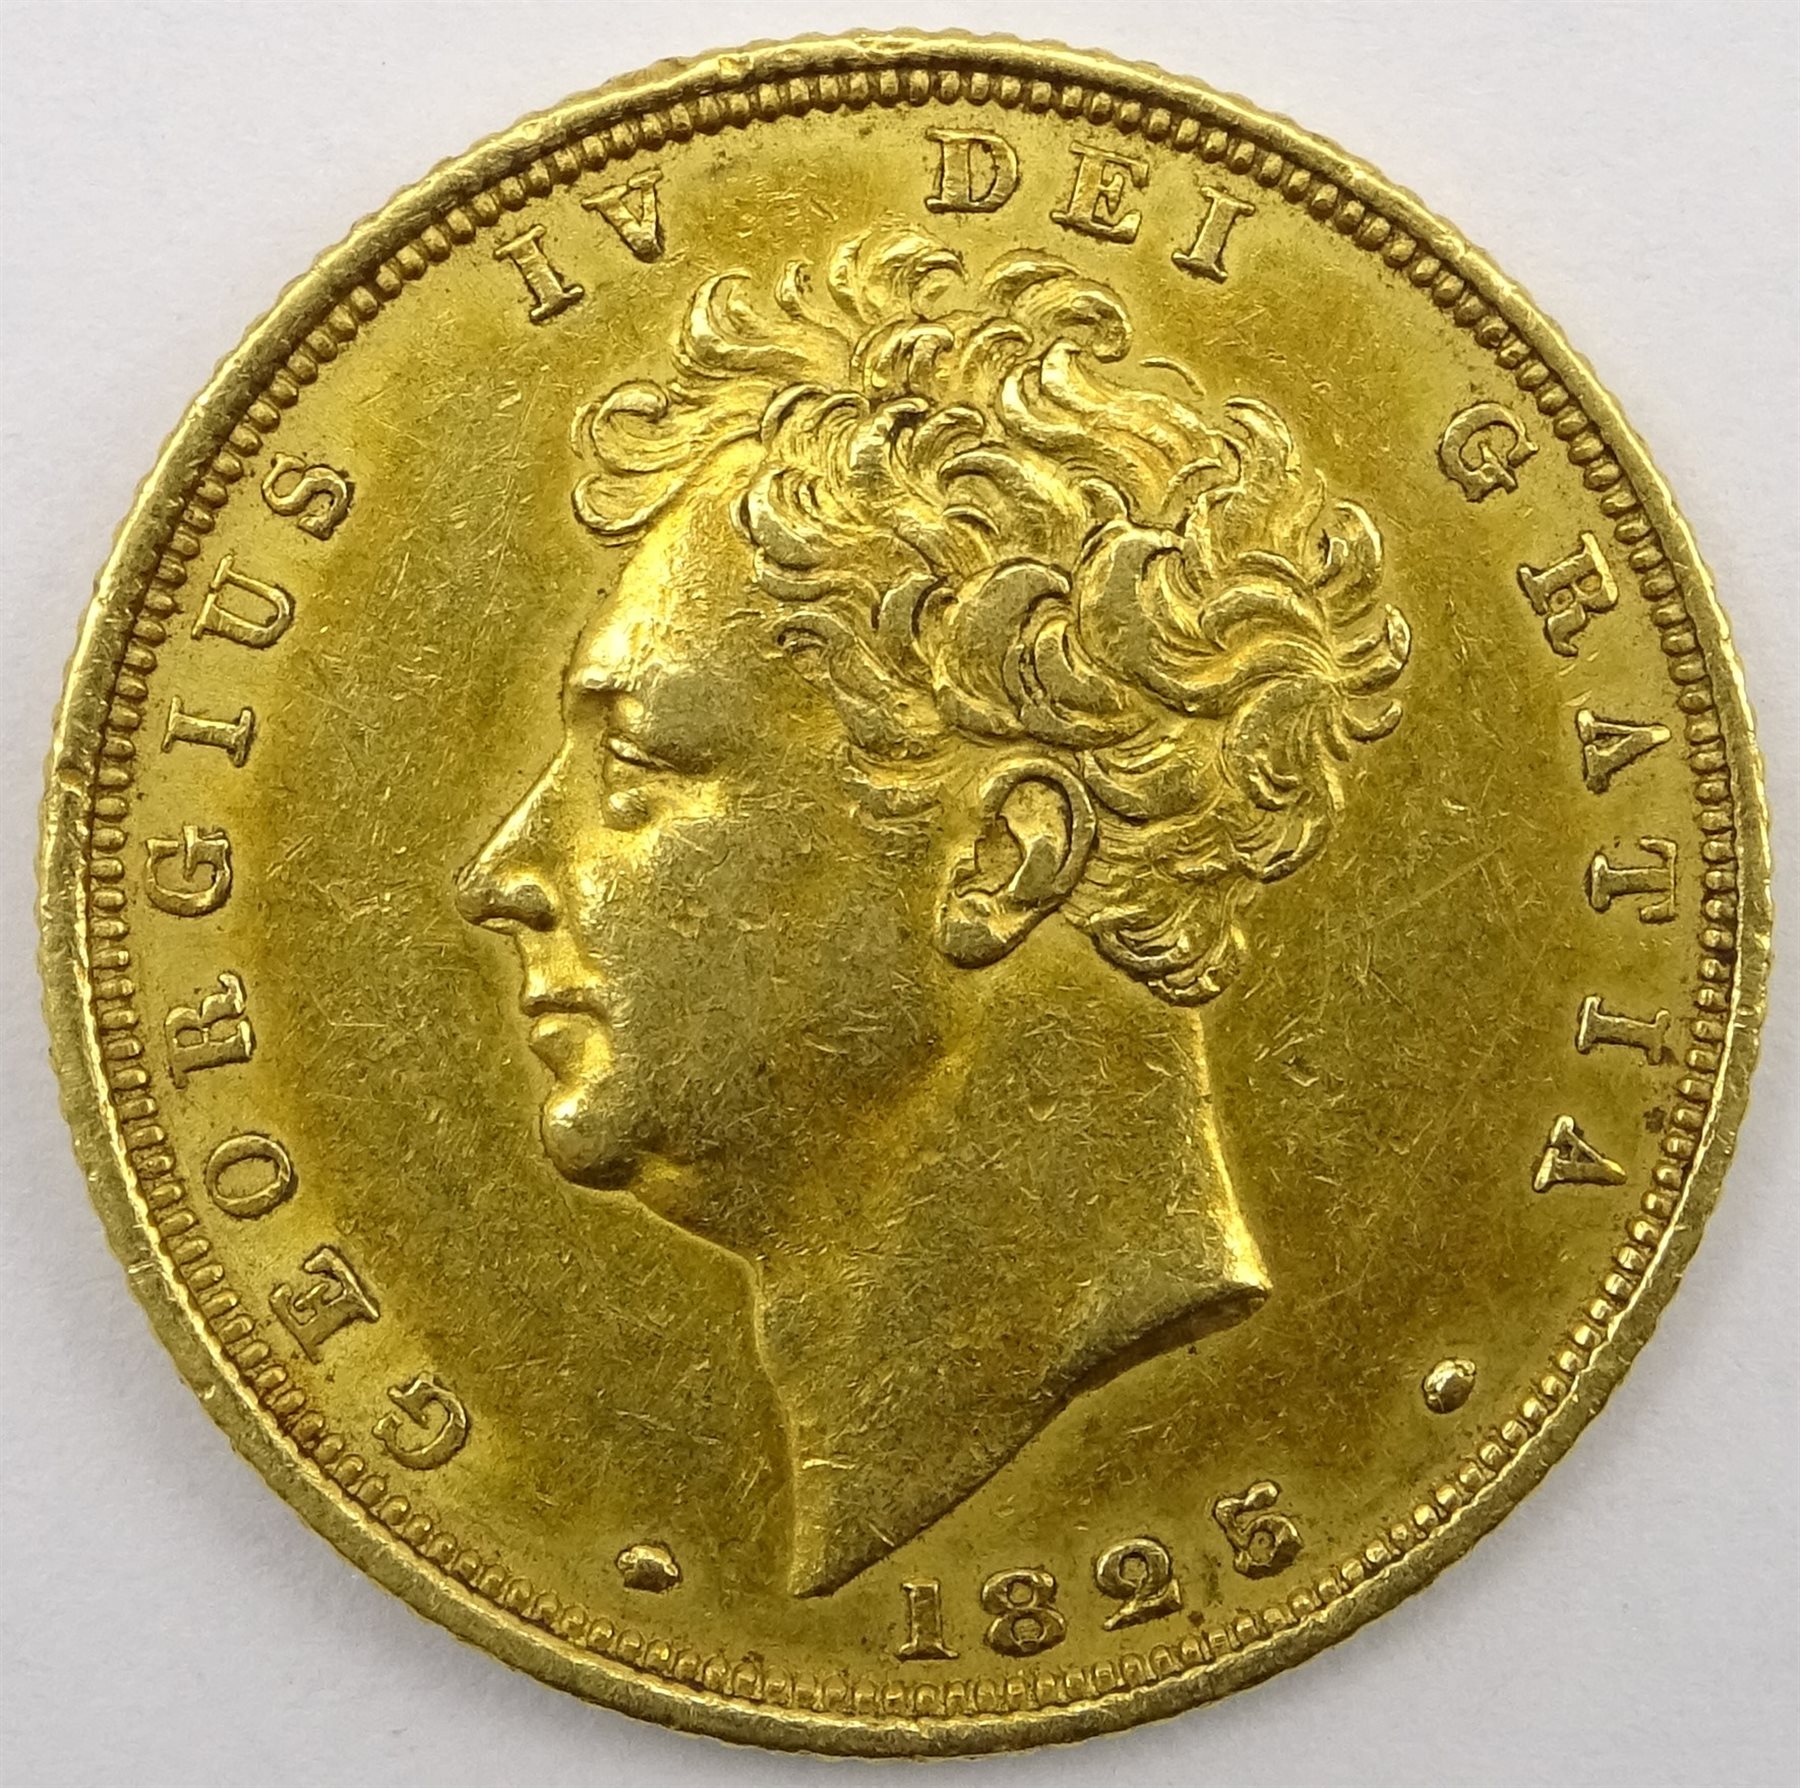 King George IV 1825 gold full sovereign, second bust, shield reverse